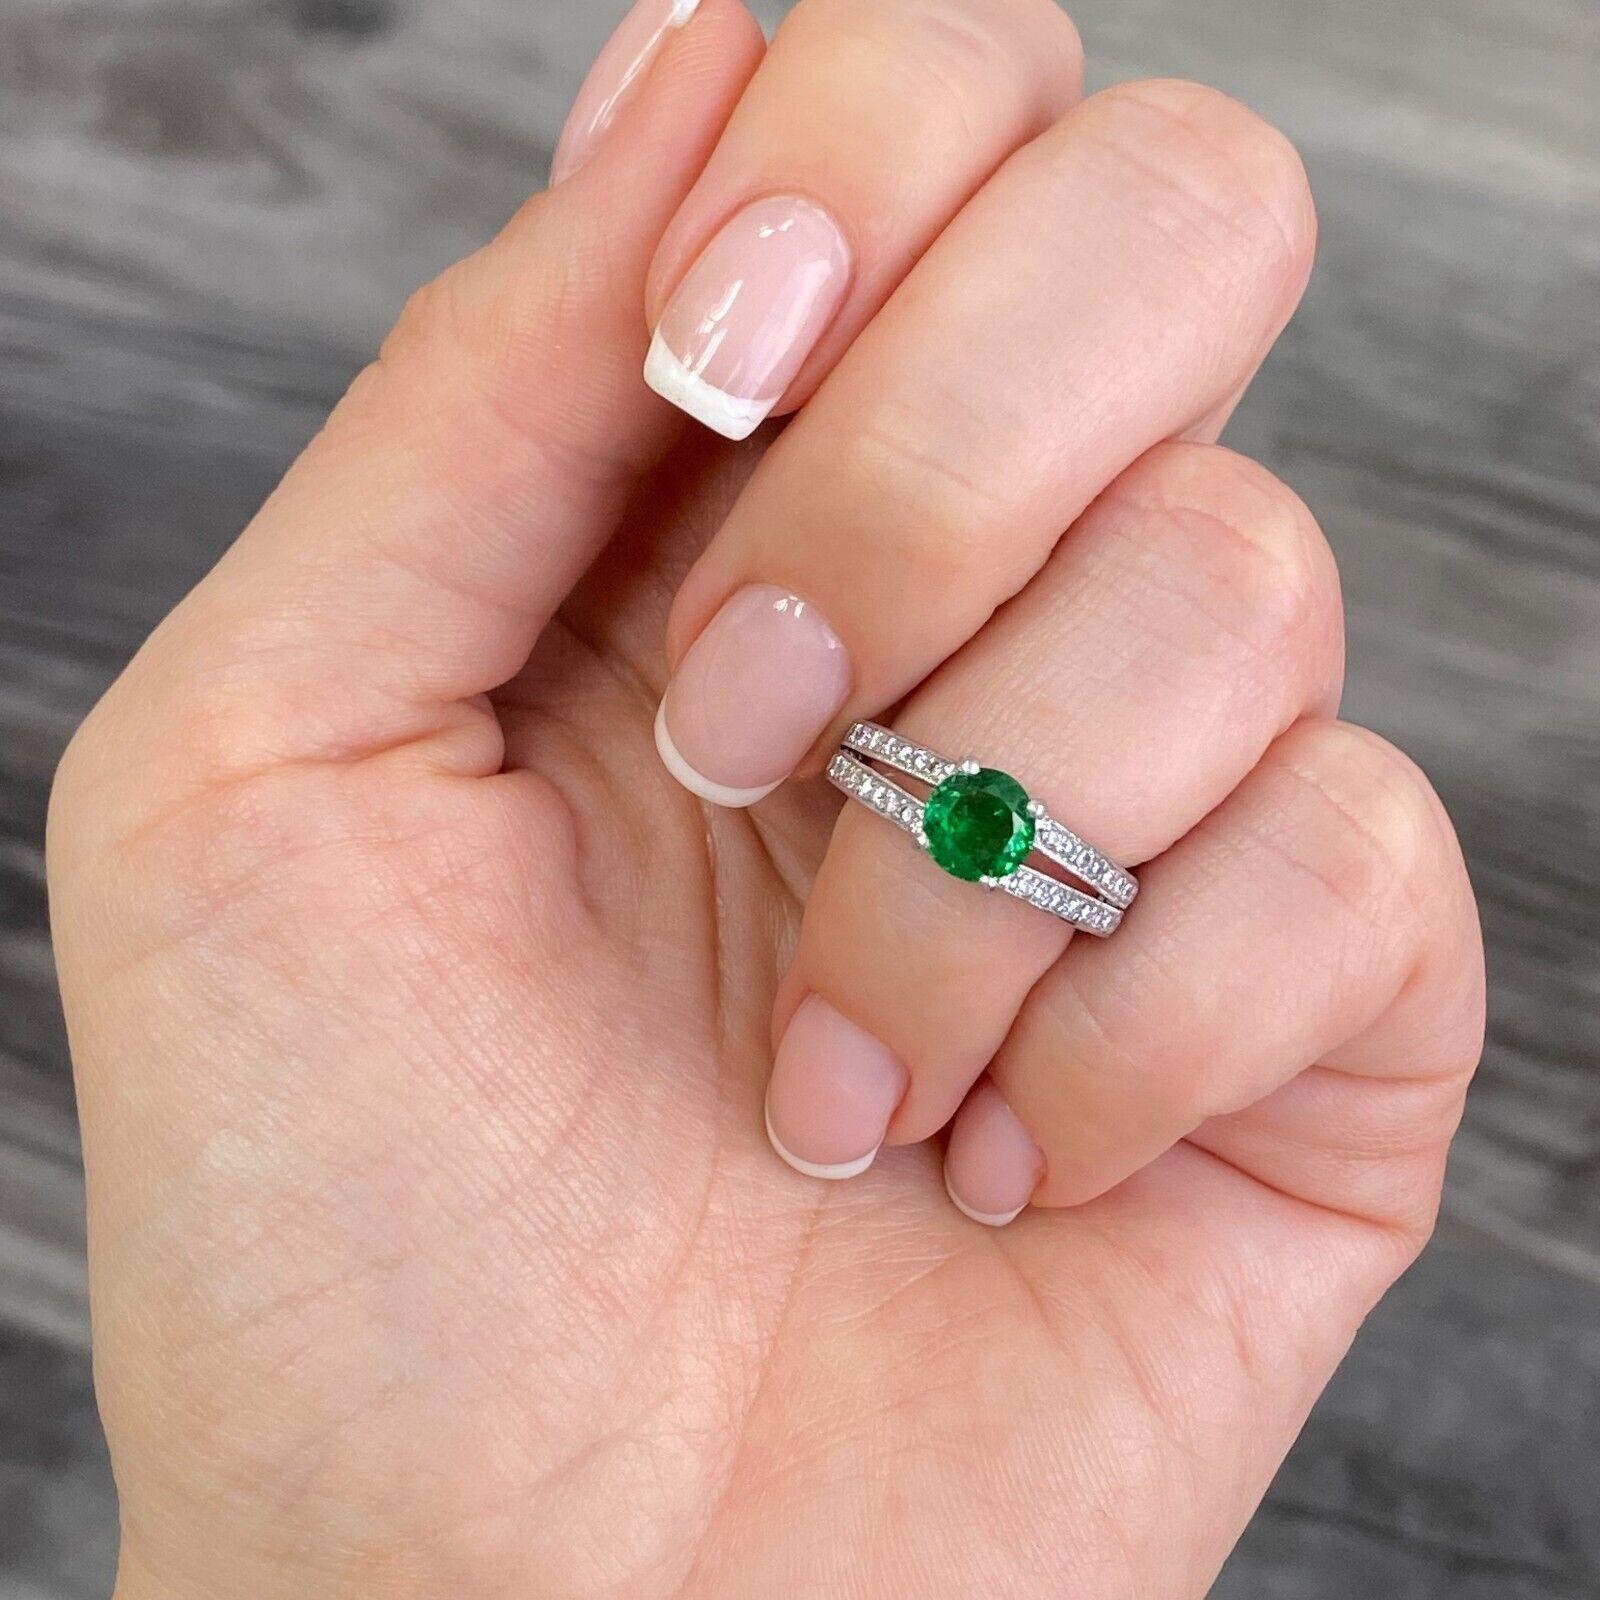 Specifications:
Pre-Owned (Great condition)
Metal: Platinum
Weight: 8.6 Gr
Main Stone: 1.16 Round Cut Tsavorite
Side stones: Approx. 0.49ctw Diamonds
Color: GH
Clarity: VS
Size: 4.75 US